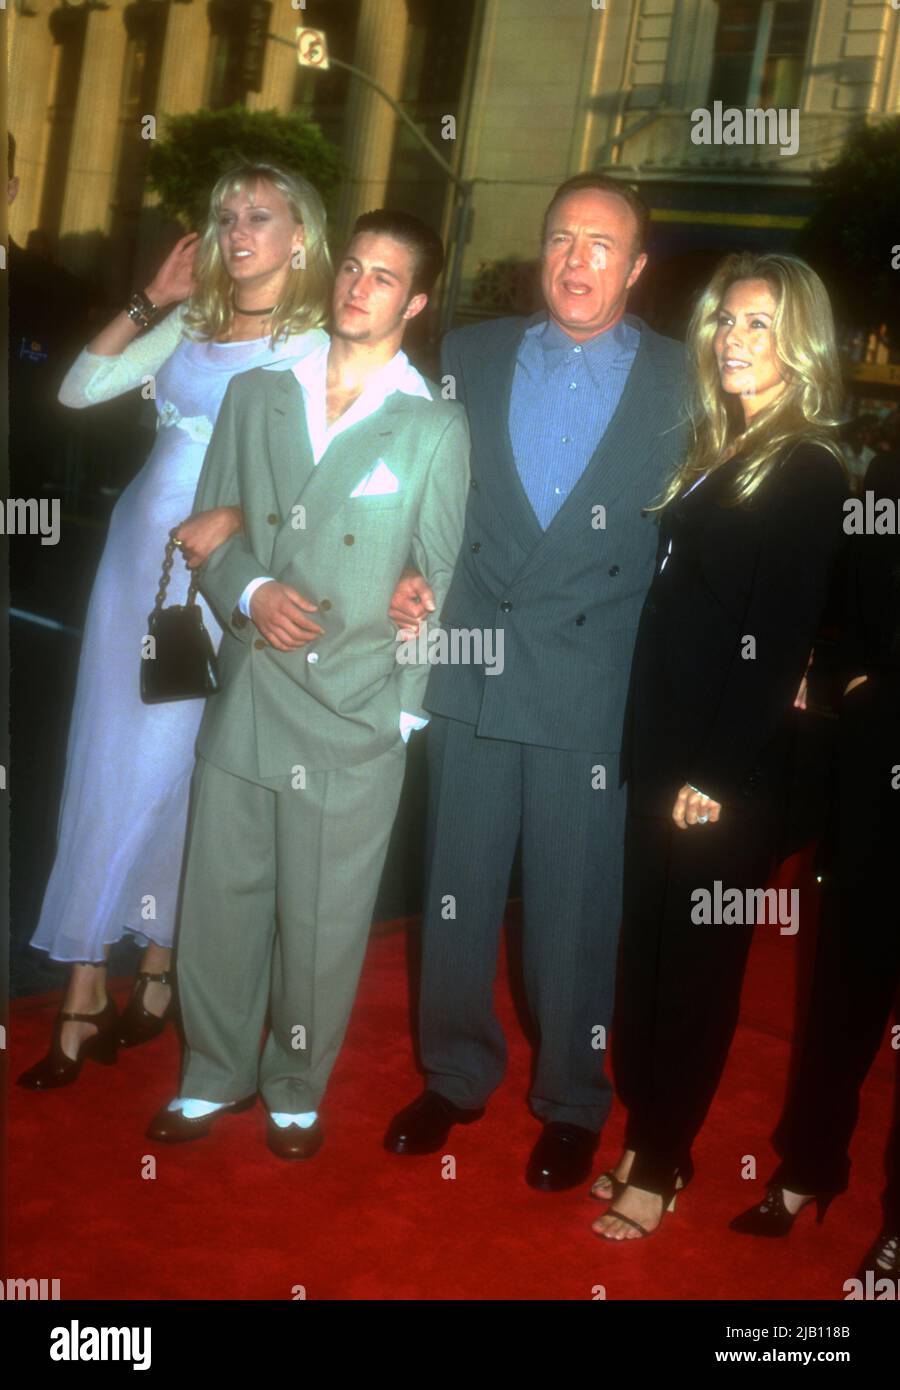 Hollywood, California, USA 11th June 1996 Model Kimberly Stewart, Actor Scott Caan, father Actor James Caan and wife Linda Stokes attend Warner Bros. Pictures 'Eraser' Premiere at Mann's Chinese Theatre on June 11, 1996 in Hollywood, California, USA. Photo by Barry King/Alamy Stock Photo Stock Photo